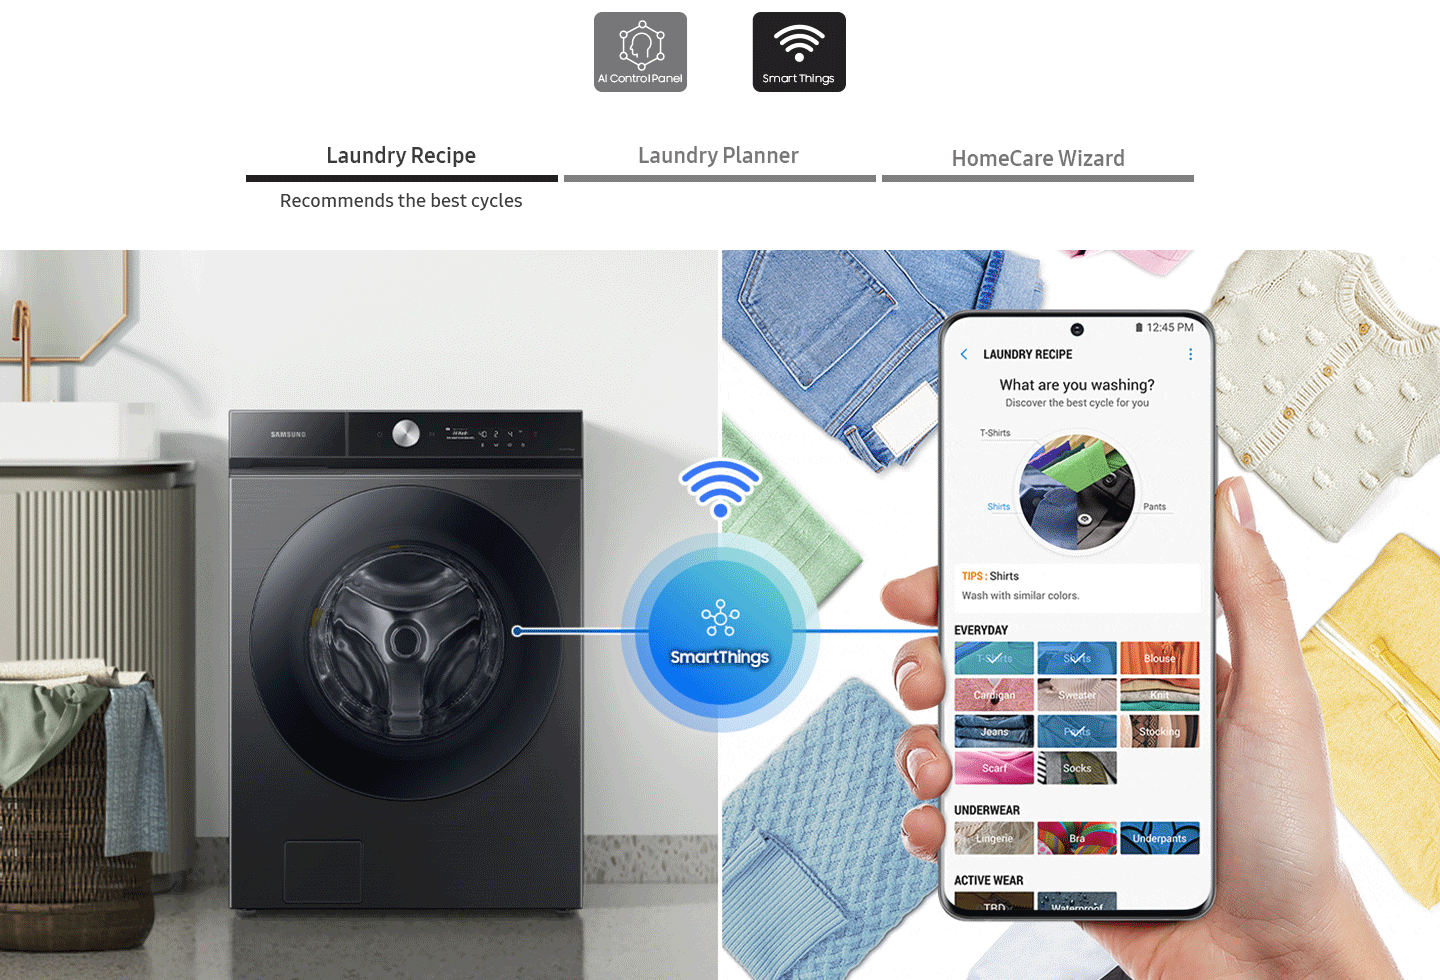 SmartThings is selected. Laundry Recipe recommends the best laundry cycles, Laundry Planner curates your daily laundry plan. Homecare Wizard helps self diagnosing and managing.